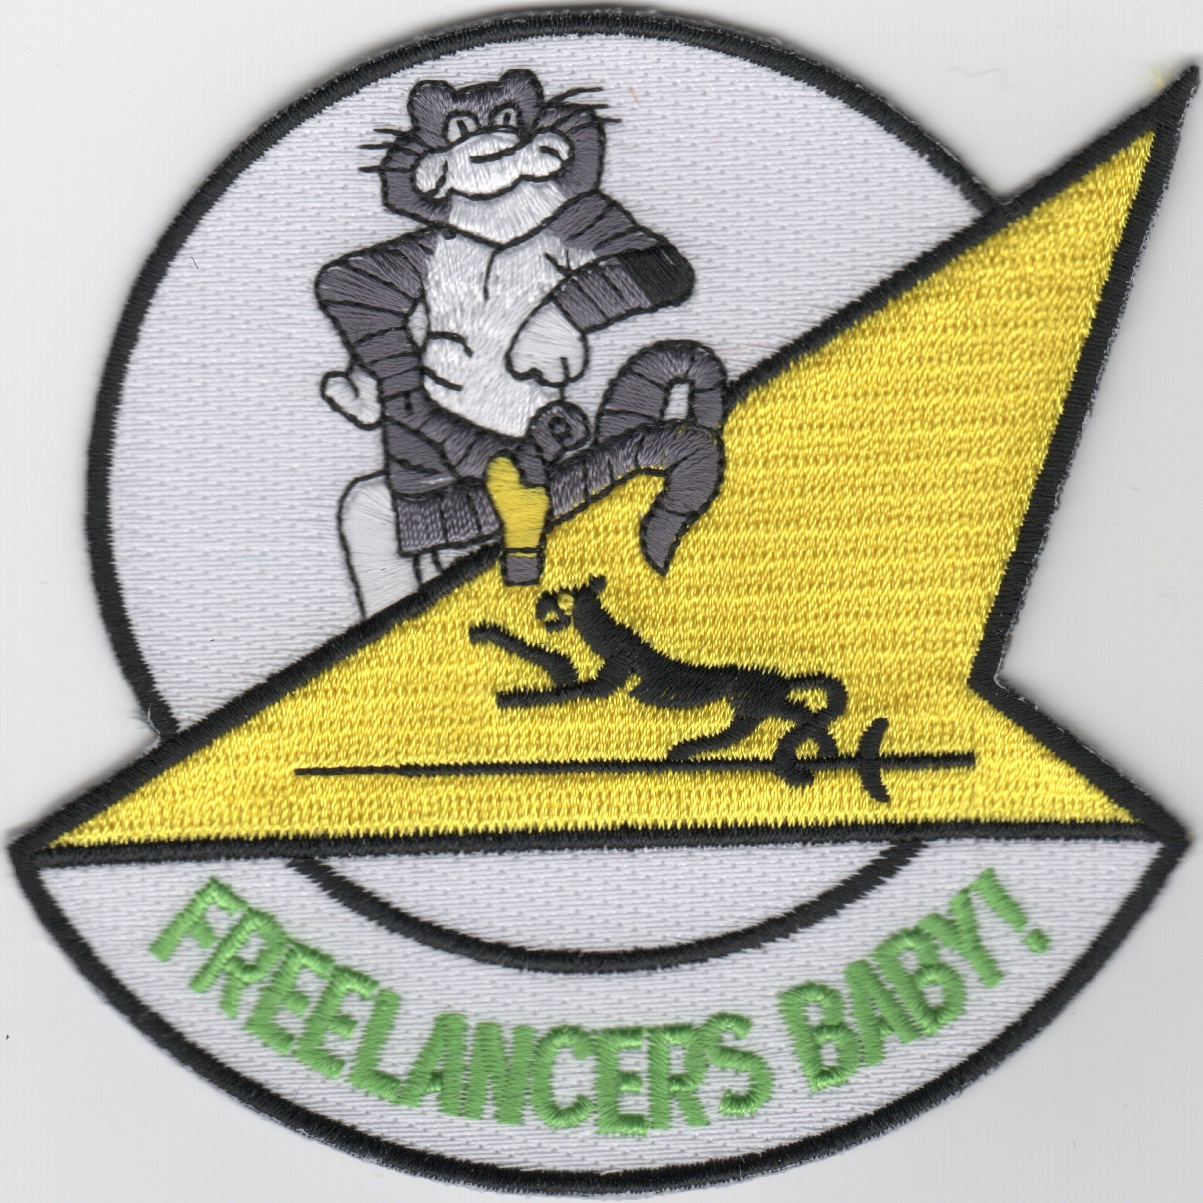 VF-21 'Freelancers, Baby' Patch